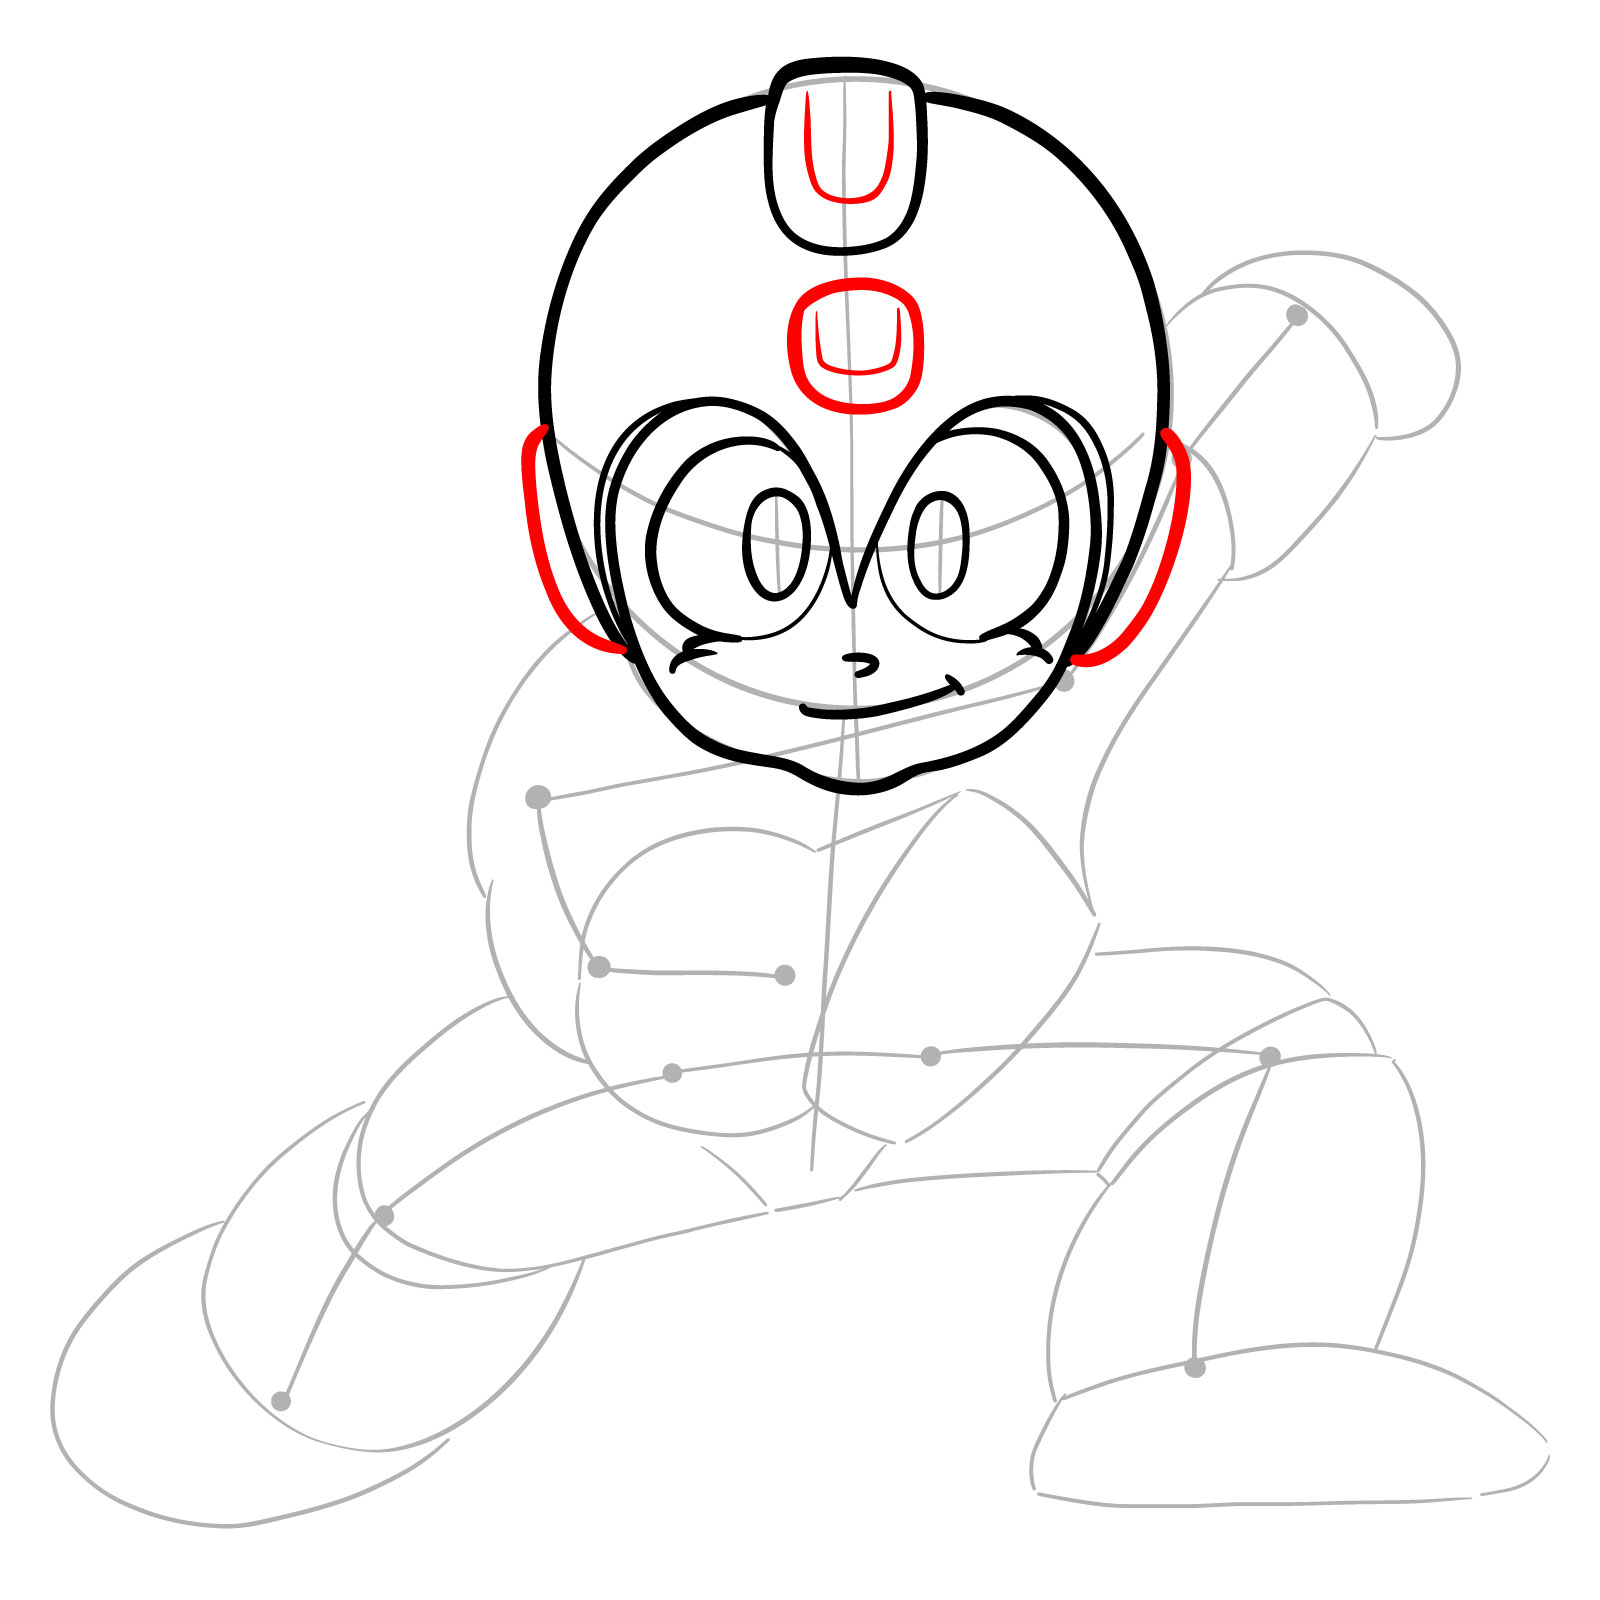 How to draw Mega Man from the original game - step 10